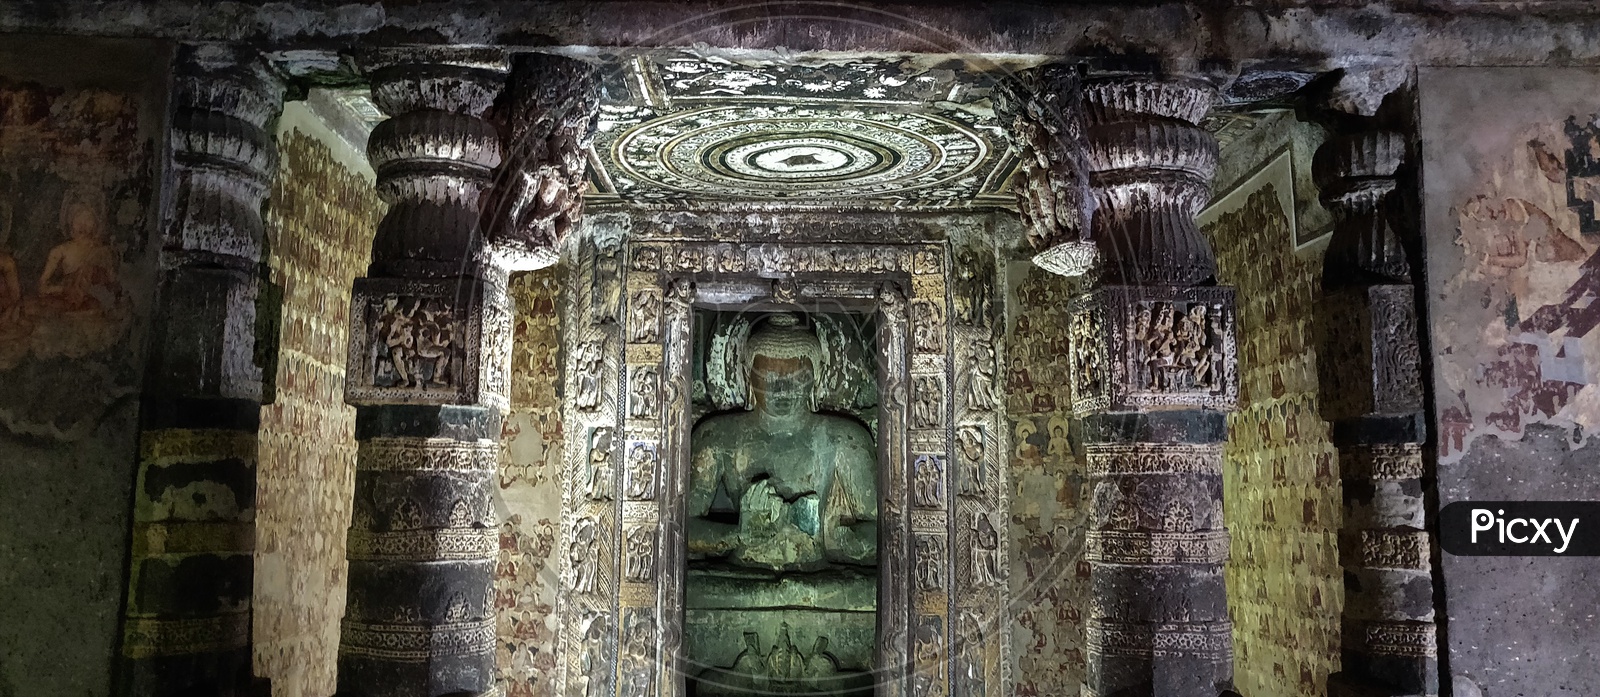 Ancient Stone Cravings With Architecture Of Buddha Temples   at Ajanta Caves    Or  Tourist Attraction Of  Ancient Caves At Ajanta in Deccan Plateau